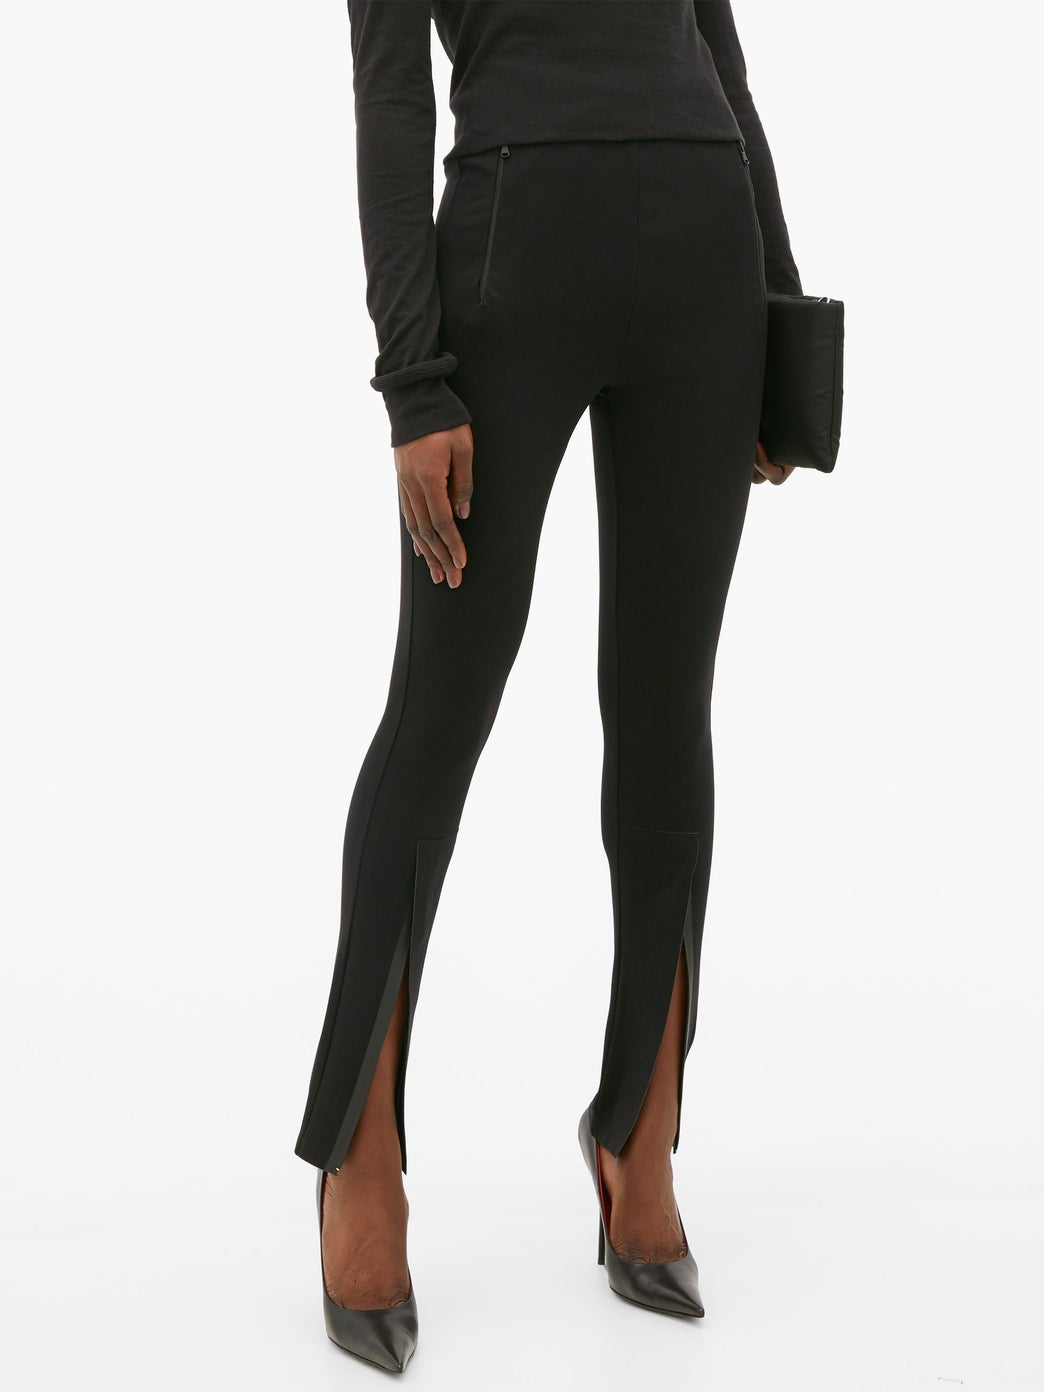 Garderob.NYC Release 05 Slit-Front Jersey Leggings